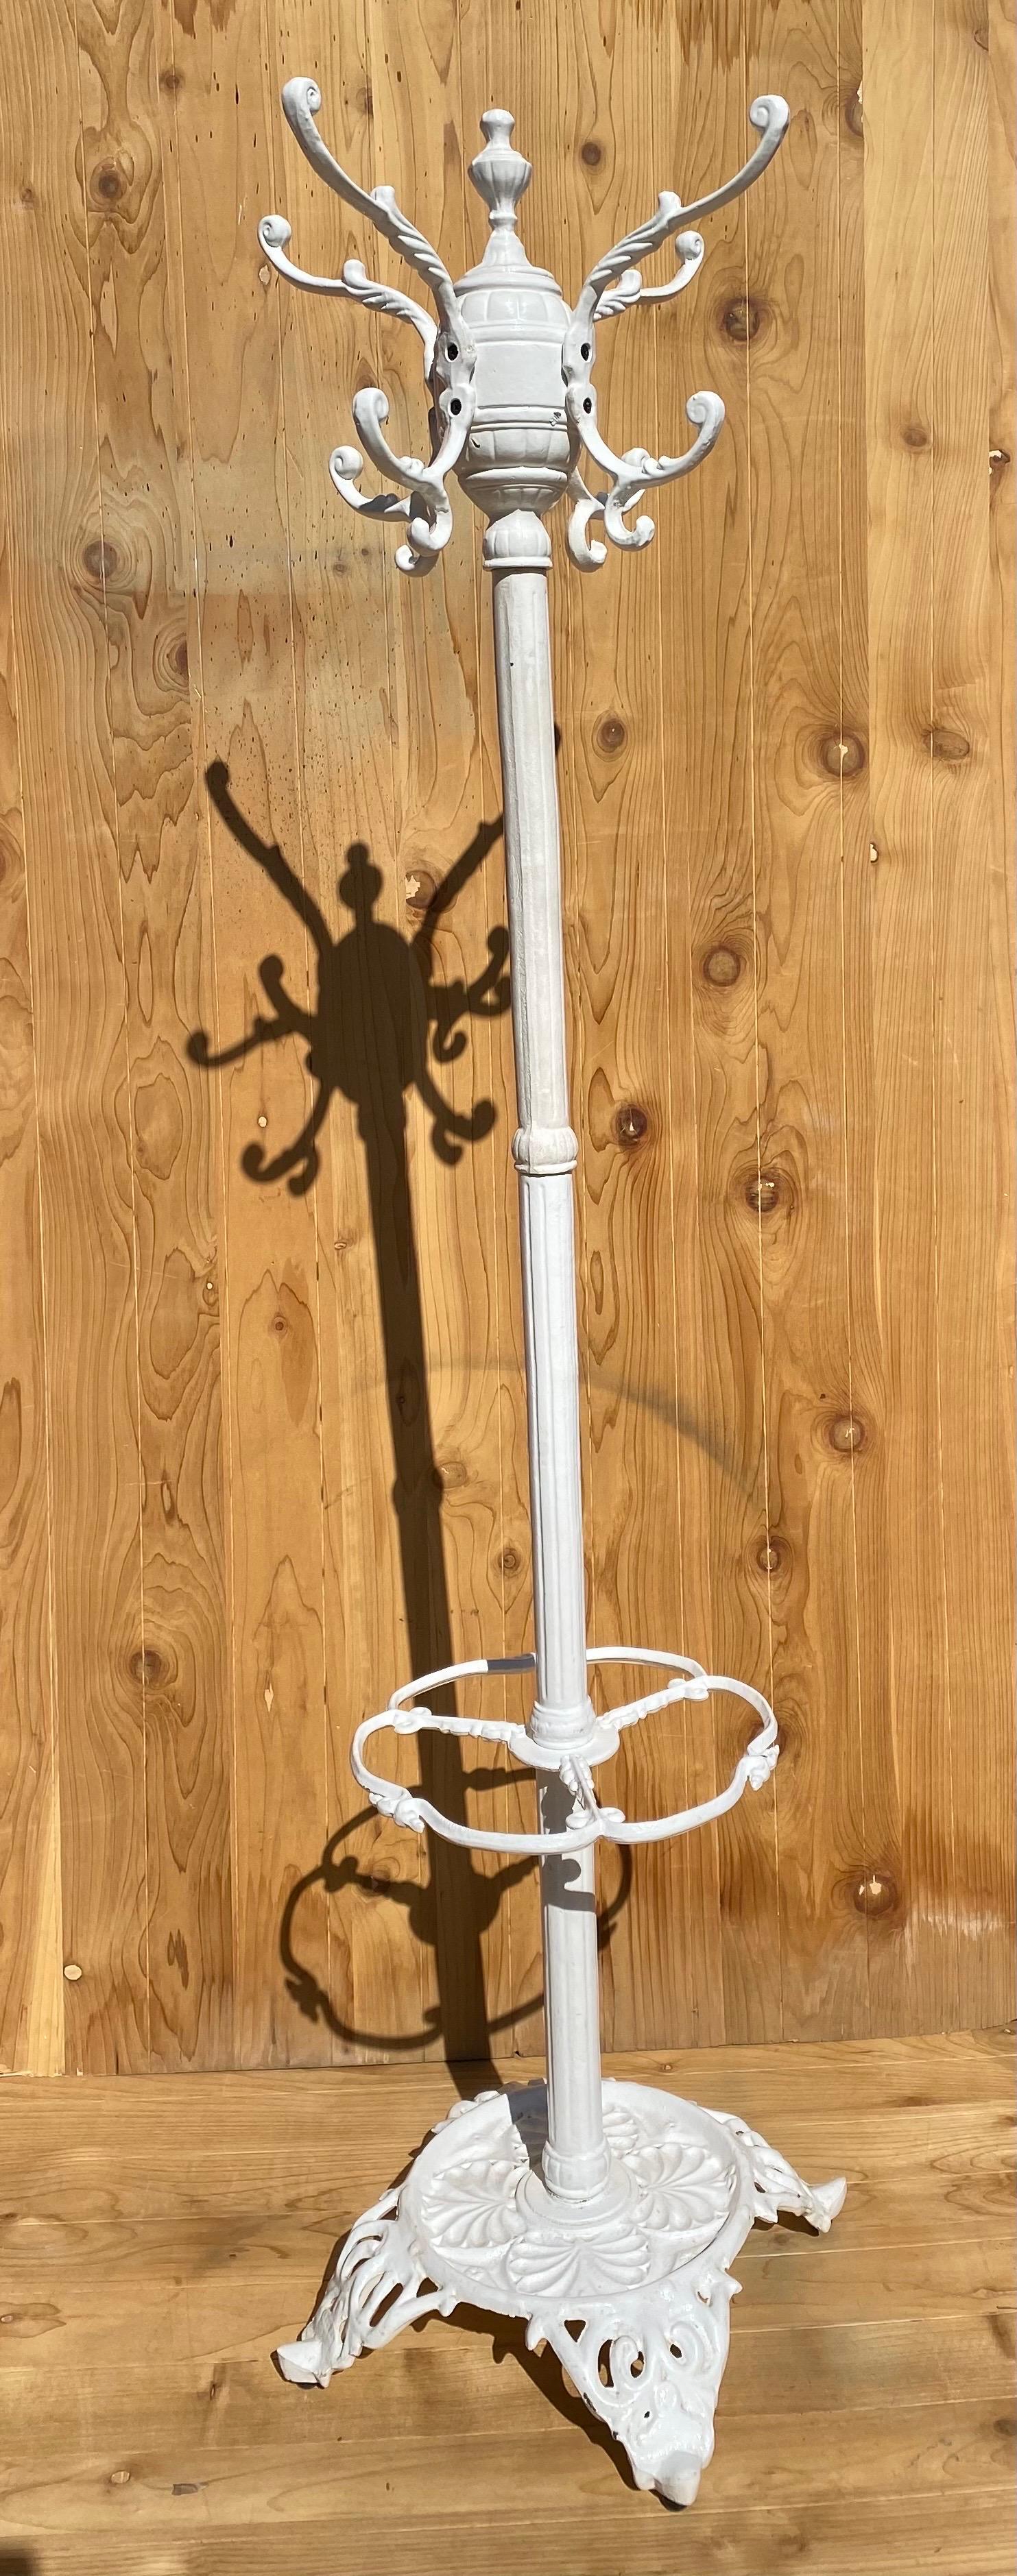 Antique Cast Wrought Iron White Painted Hall Tree

This ornate white hall tree would be a practical and beautiful additional to your entryway or mudroom. With multiple hooks for coats and ample space for umbrellas, it can service all your guests'